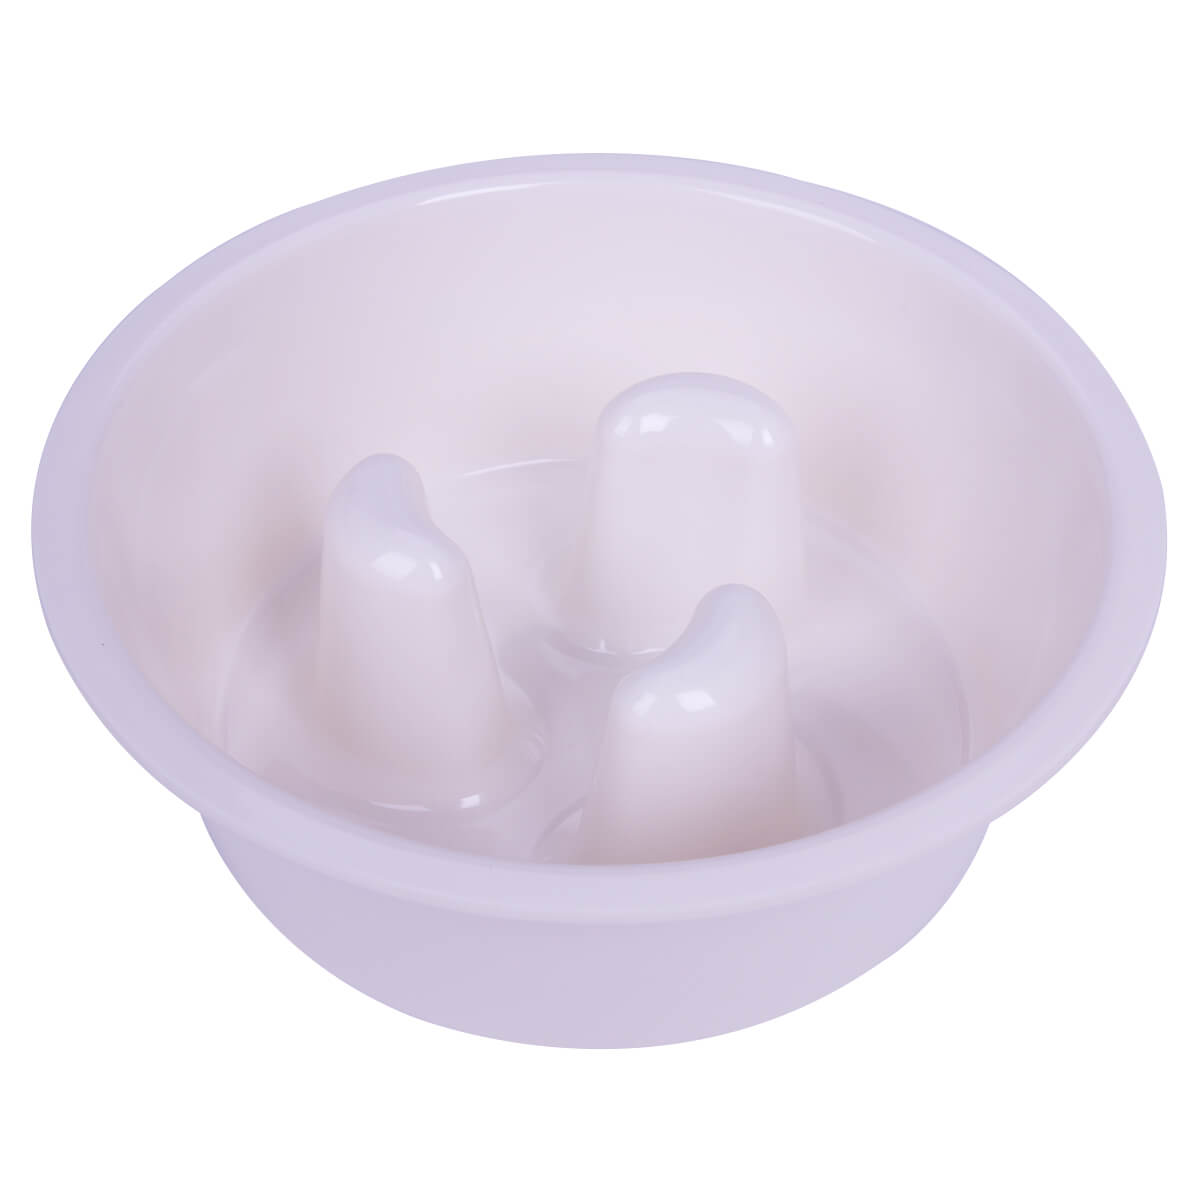 SuperDesign-Elevated-Dog-Bowl-Slow-Bowl-Replacement-White-Color-2021